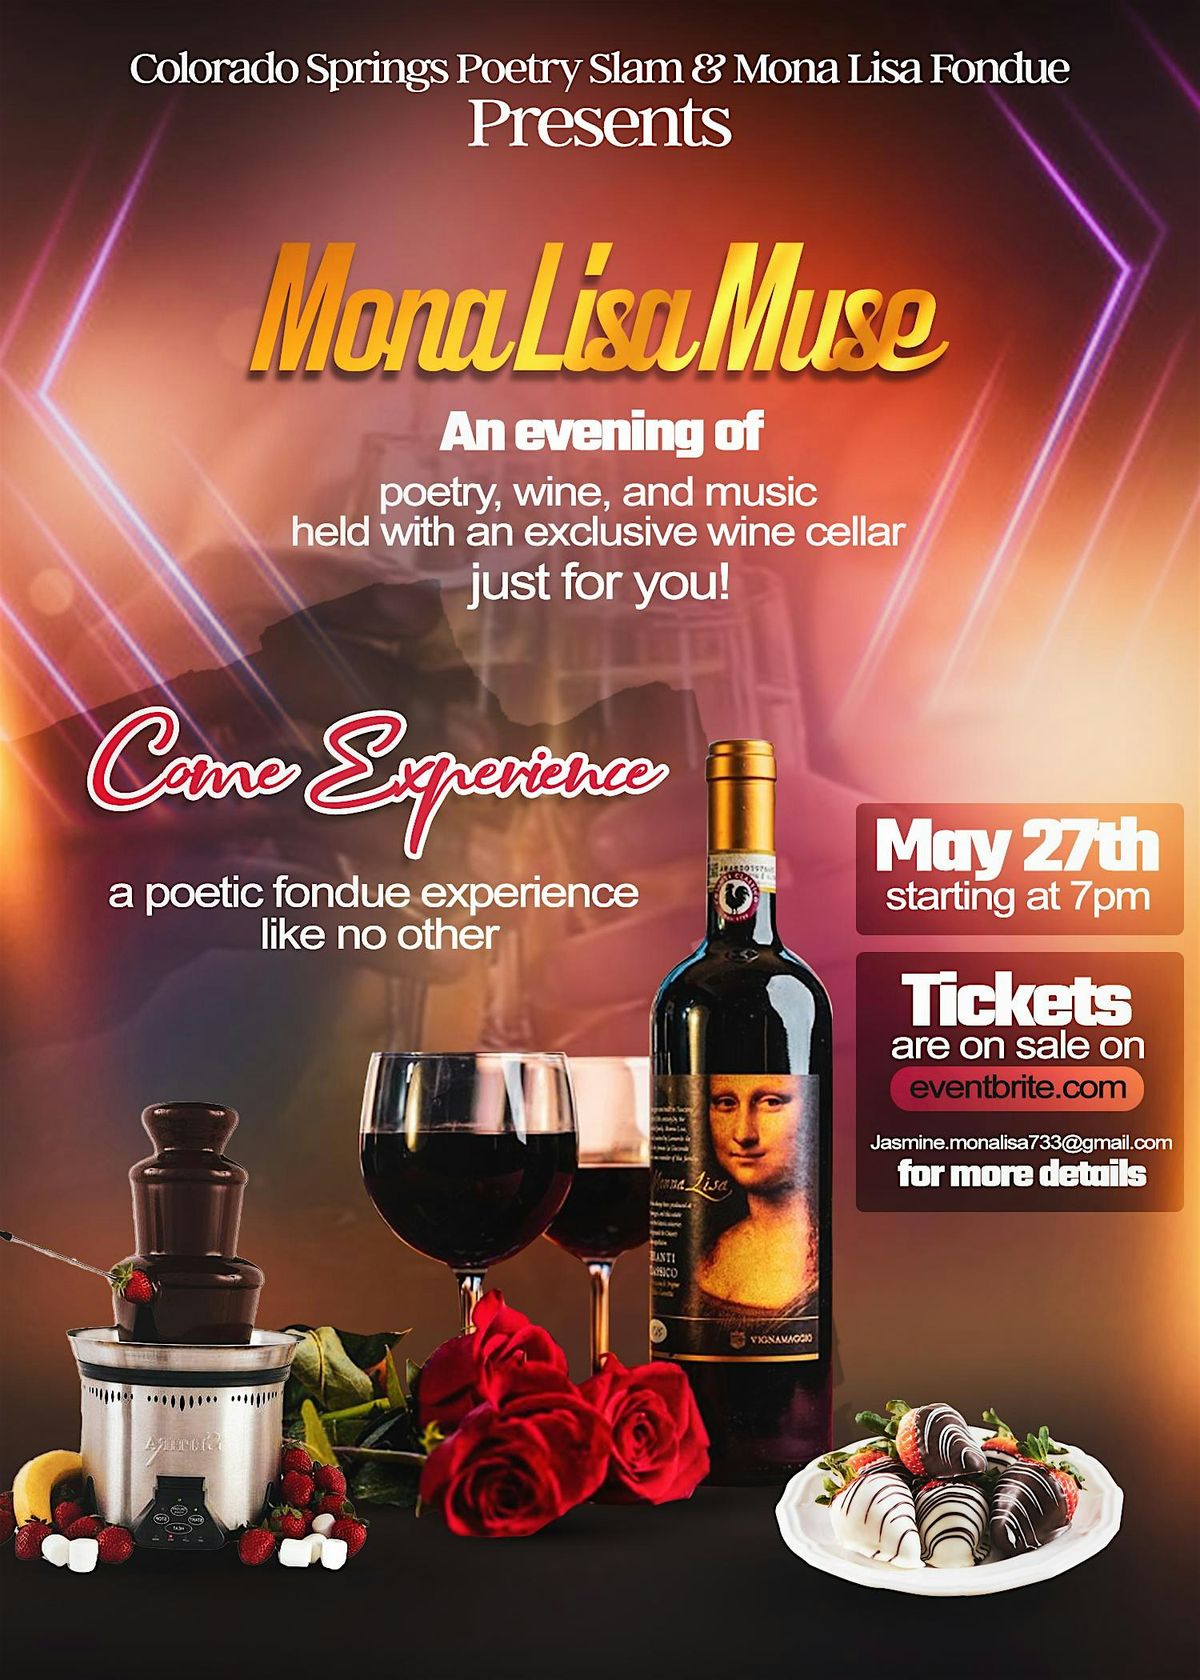 Mona Lisa Muse, a poetry & wine event!